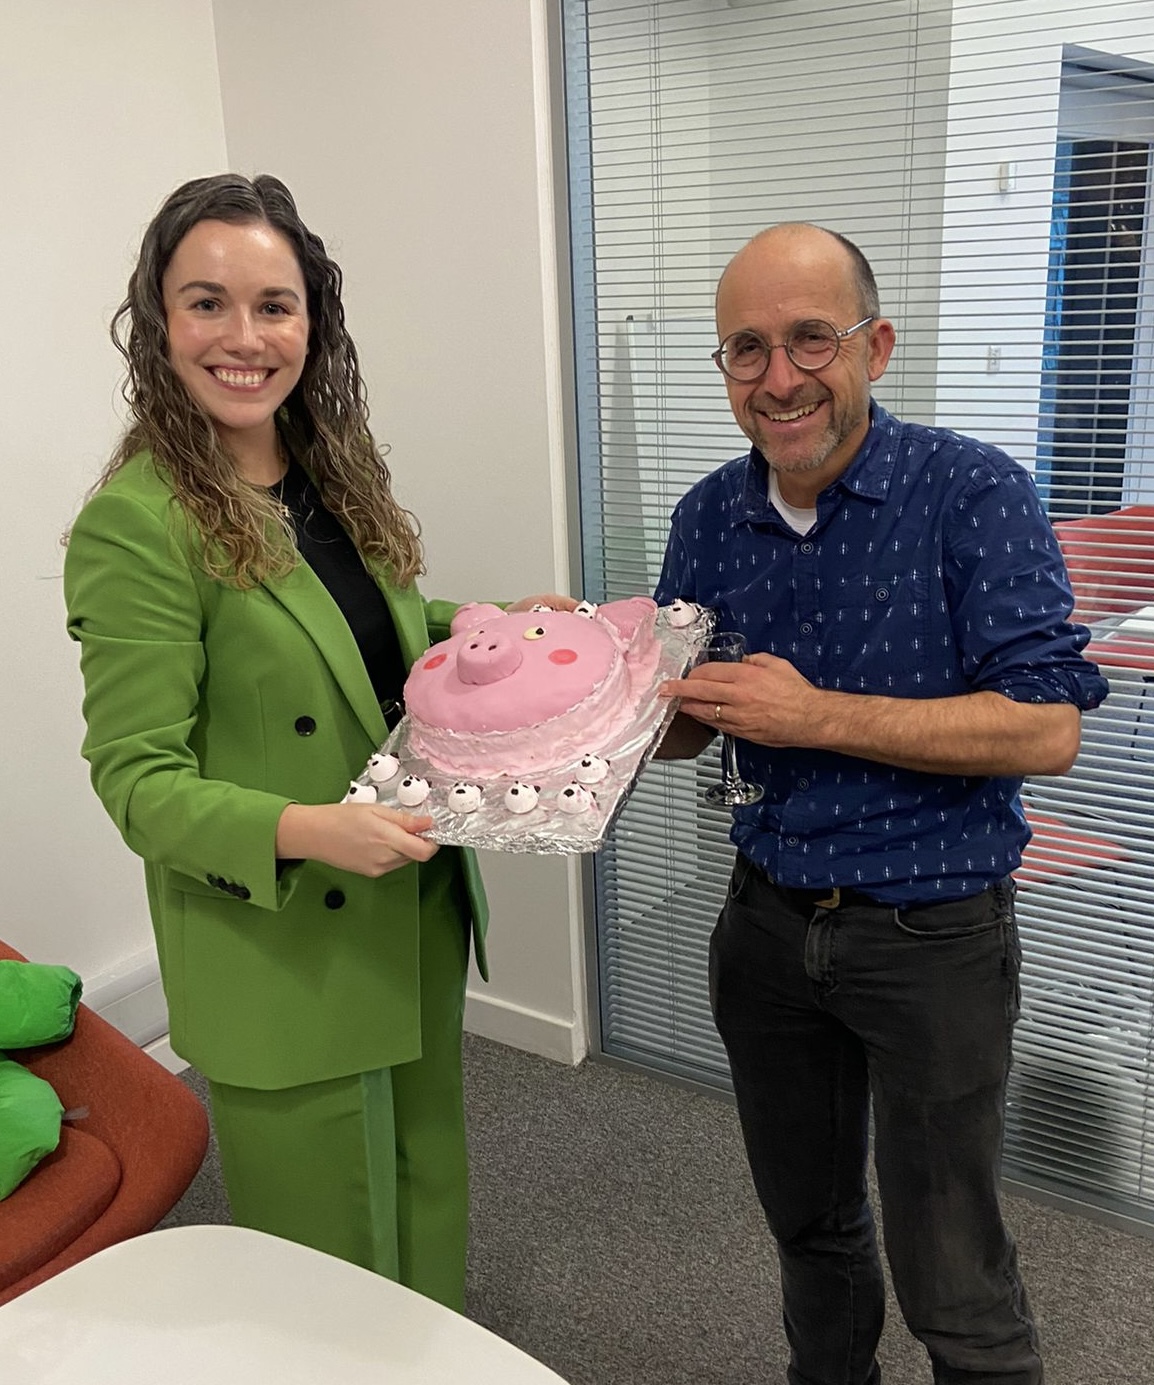 A woman in a green trouser suit and a man in a navy blue shirt with a cake shaped in the face of a pig